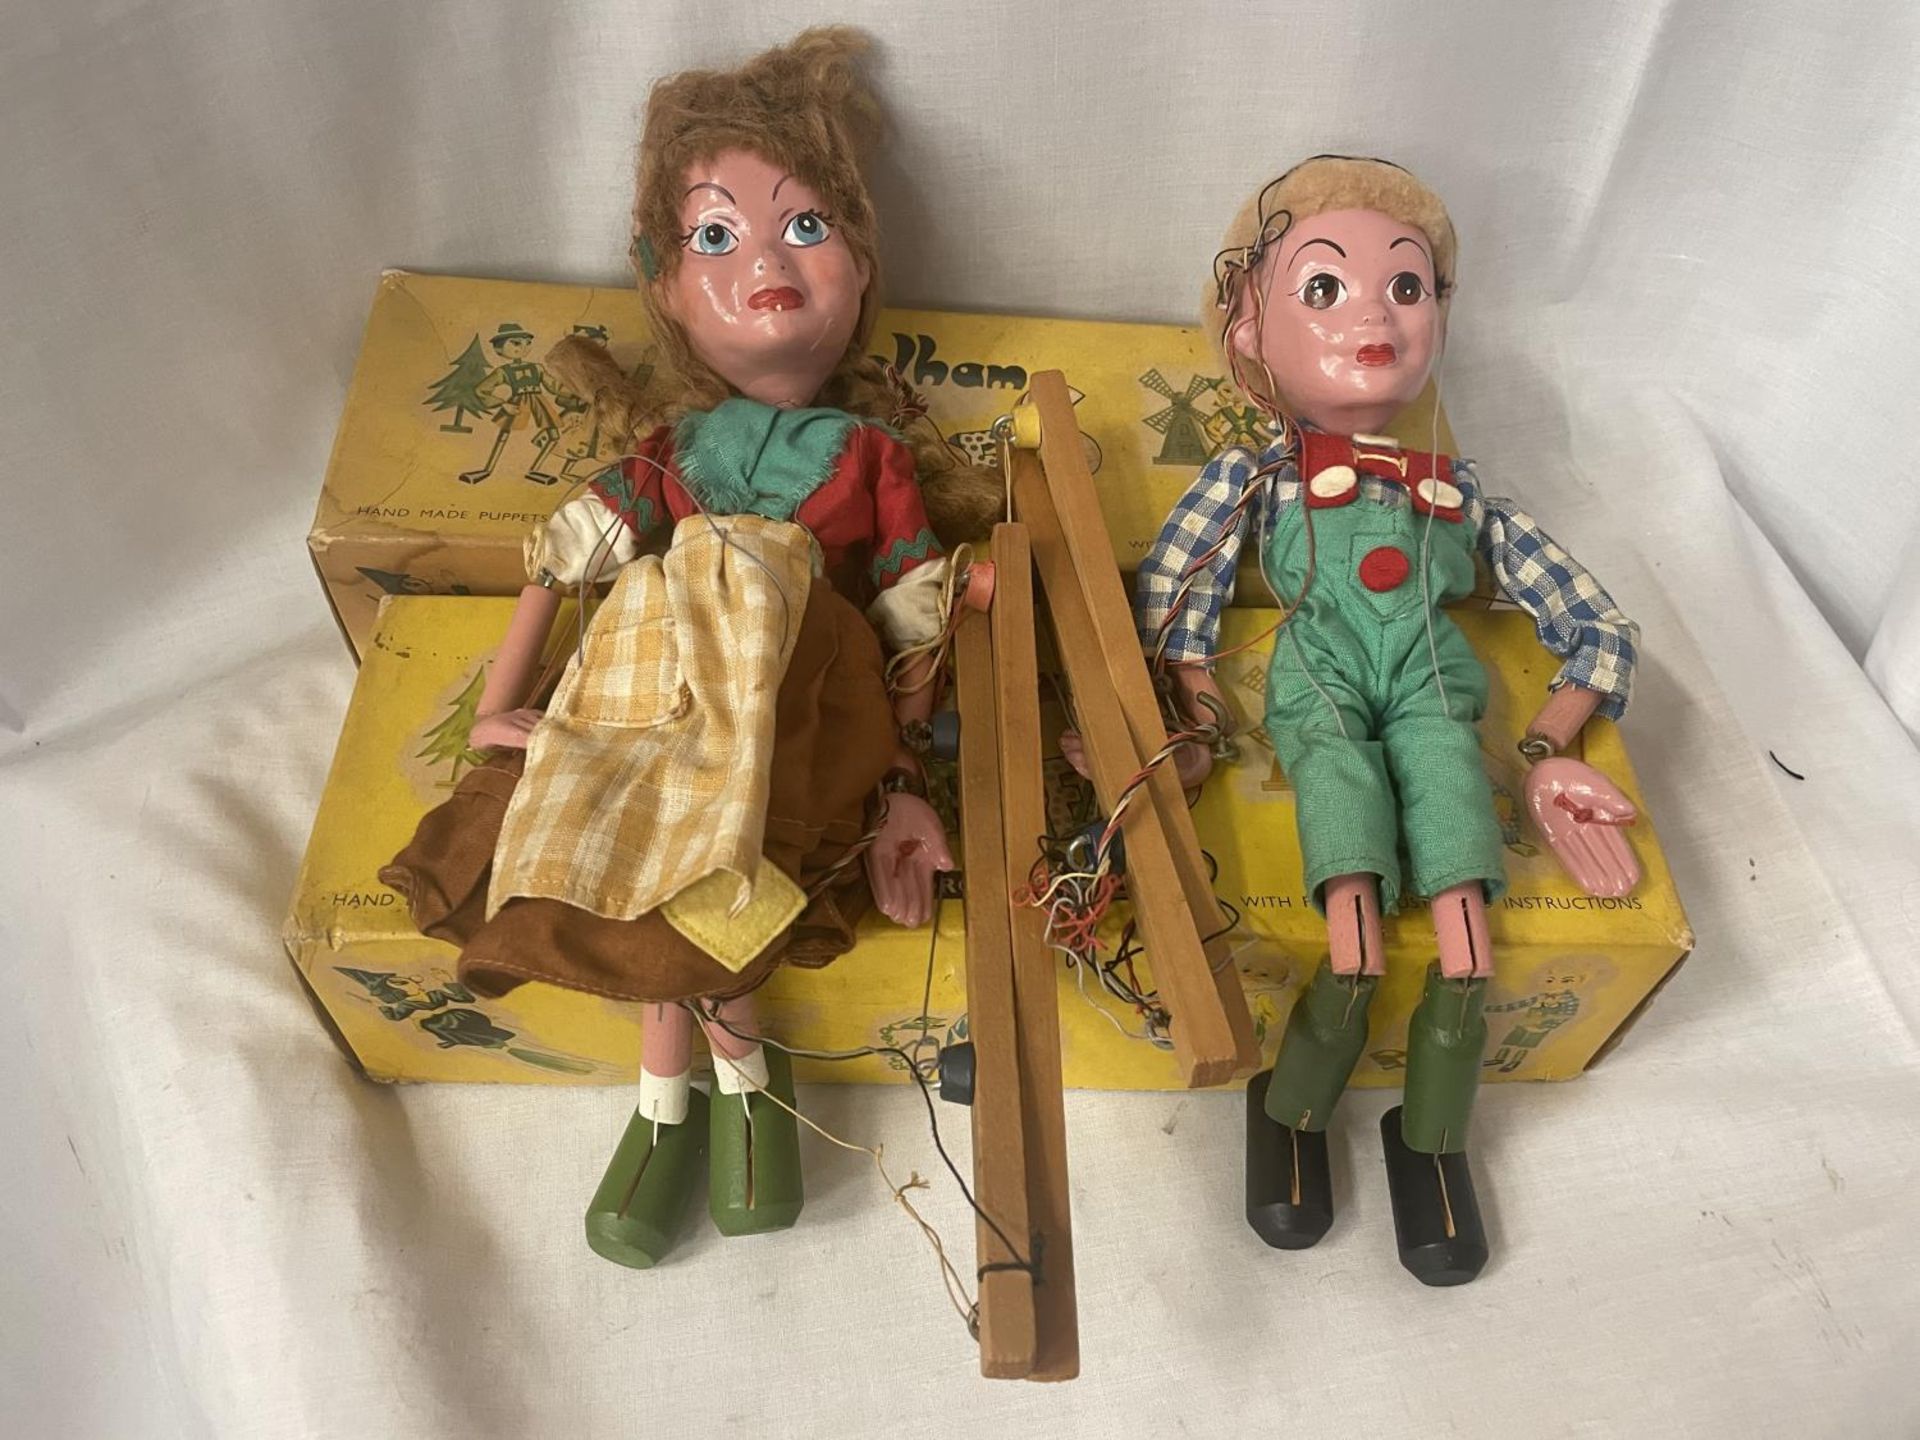 TWO BOXED VINTAGE PELHAM PUPPETS - HANSEL AND GRETEL